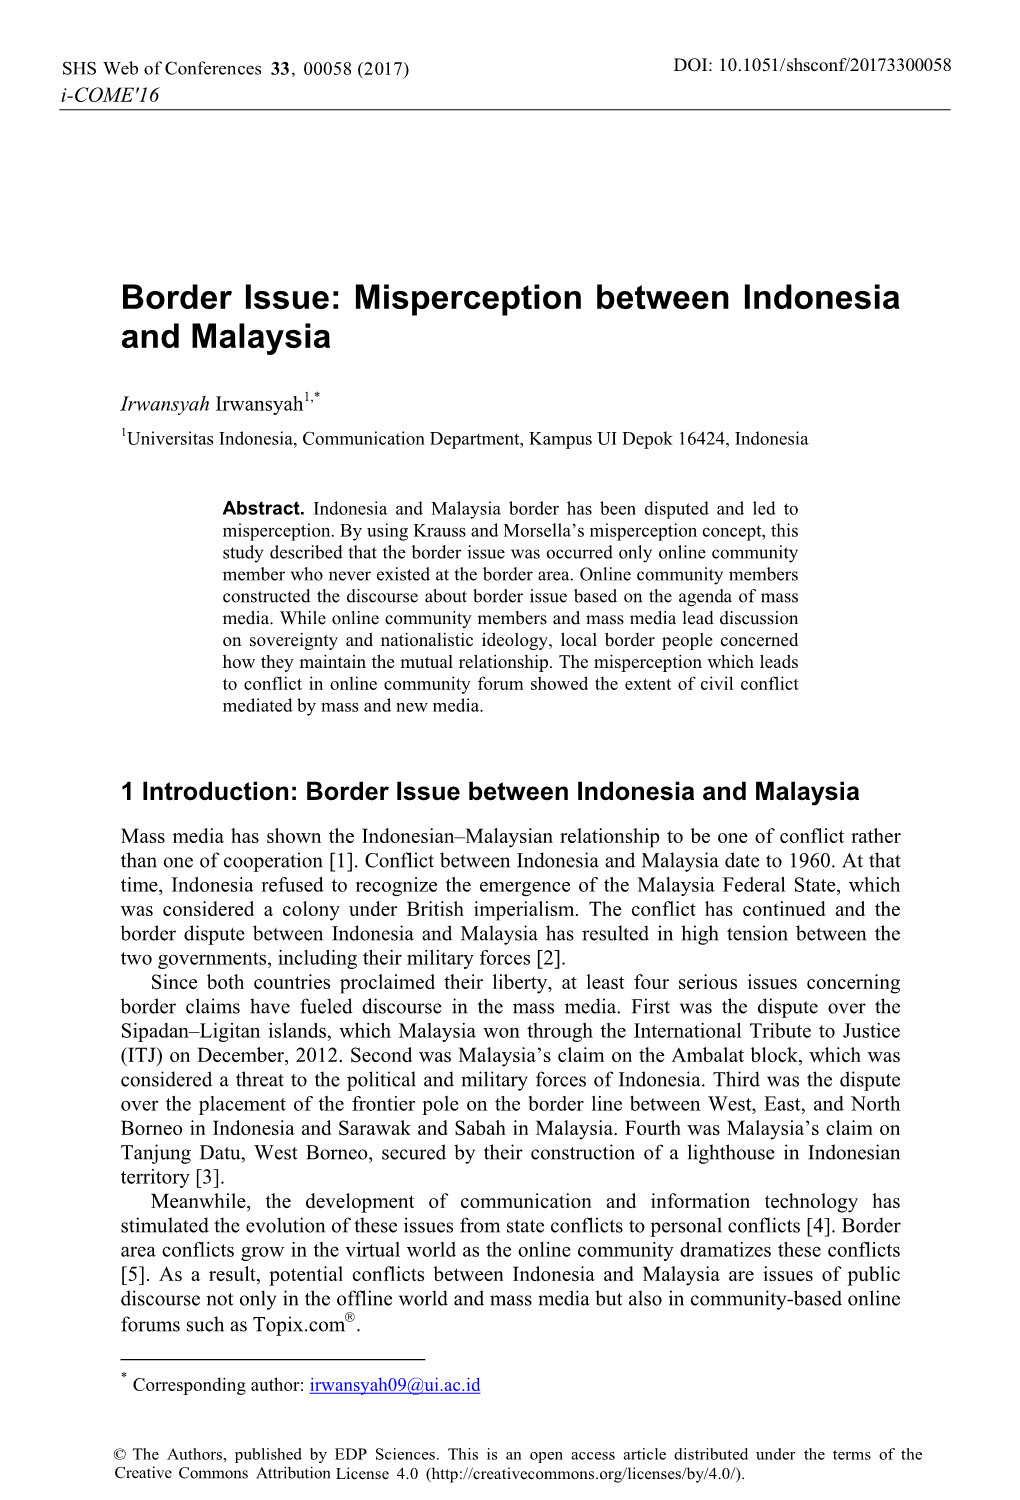 Border Issue: Misperception Between Indonesia and Malaysia